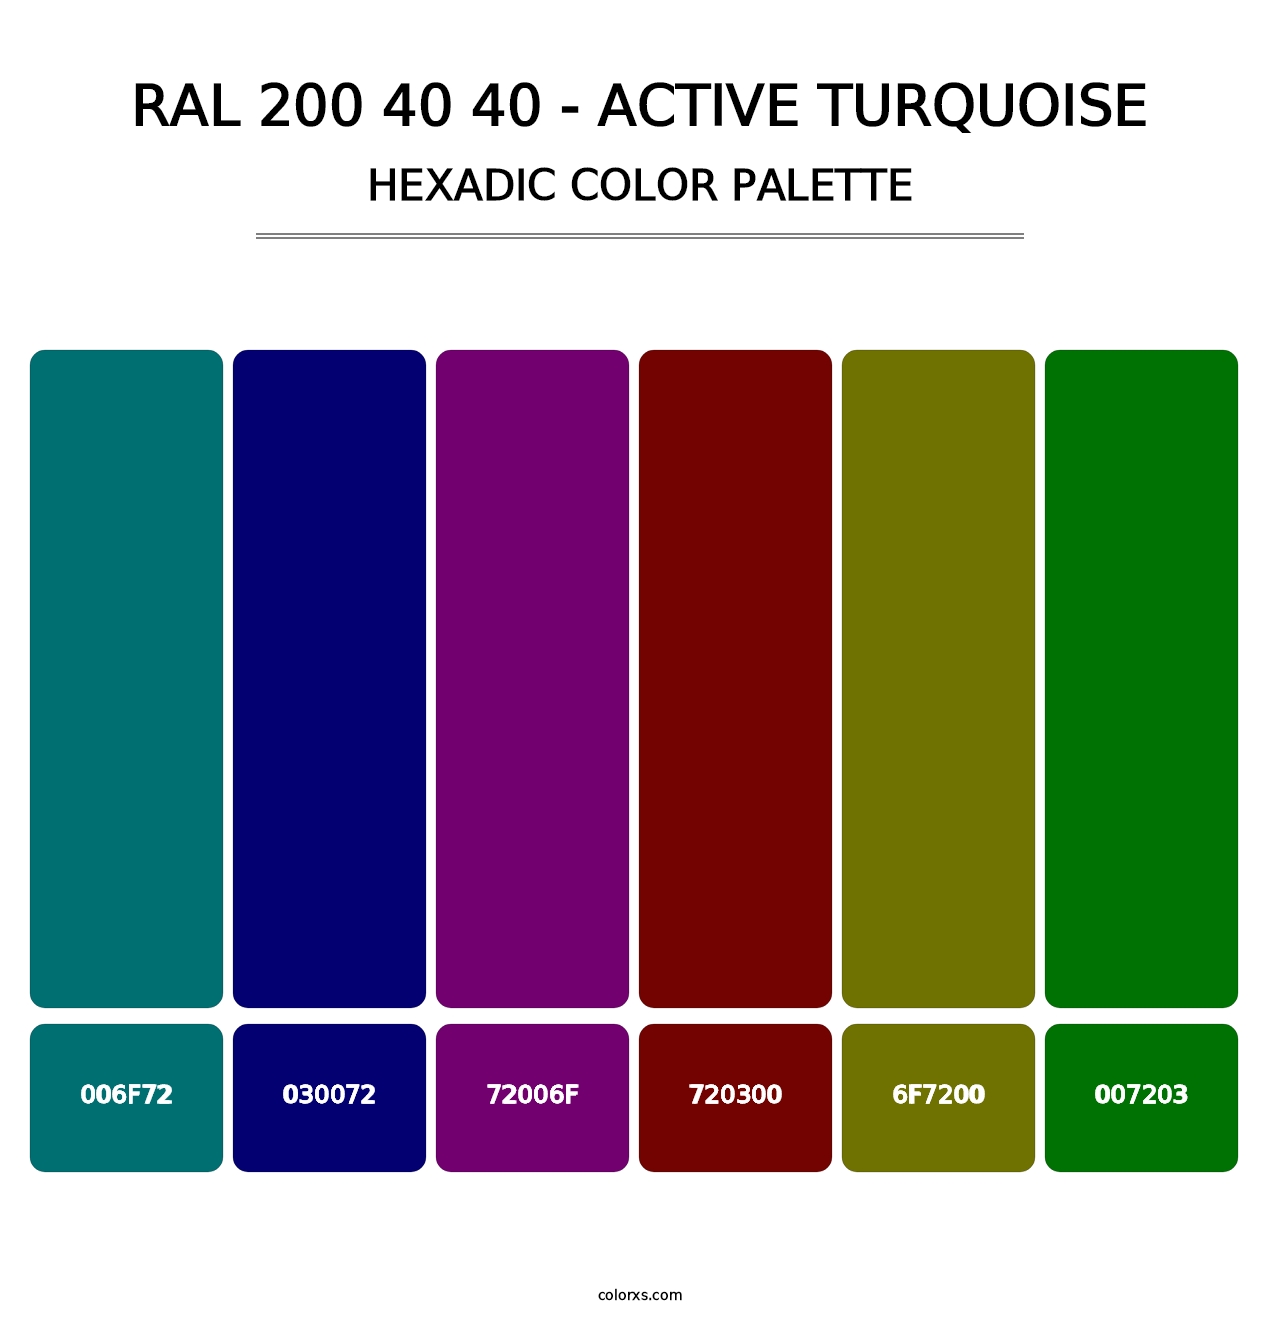 RAL 200 40 40 - Active Turquoise - Hexadic Color Palette